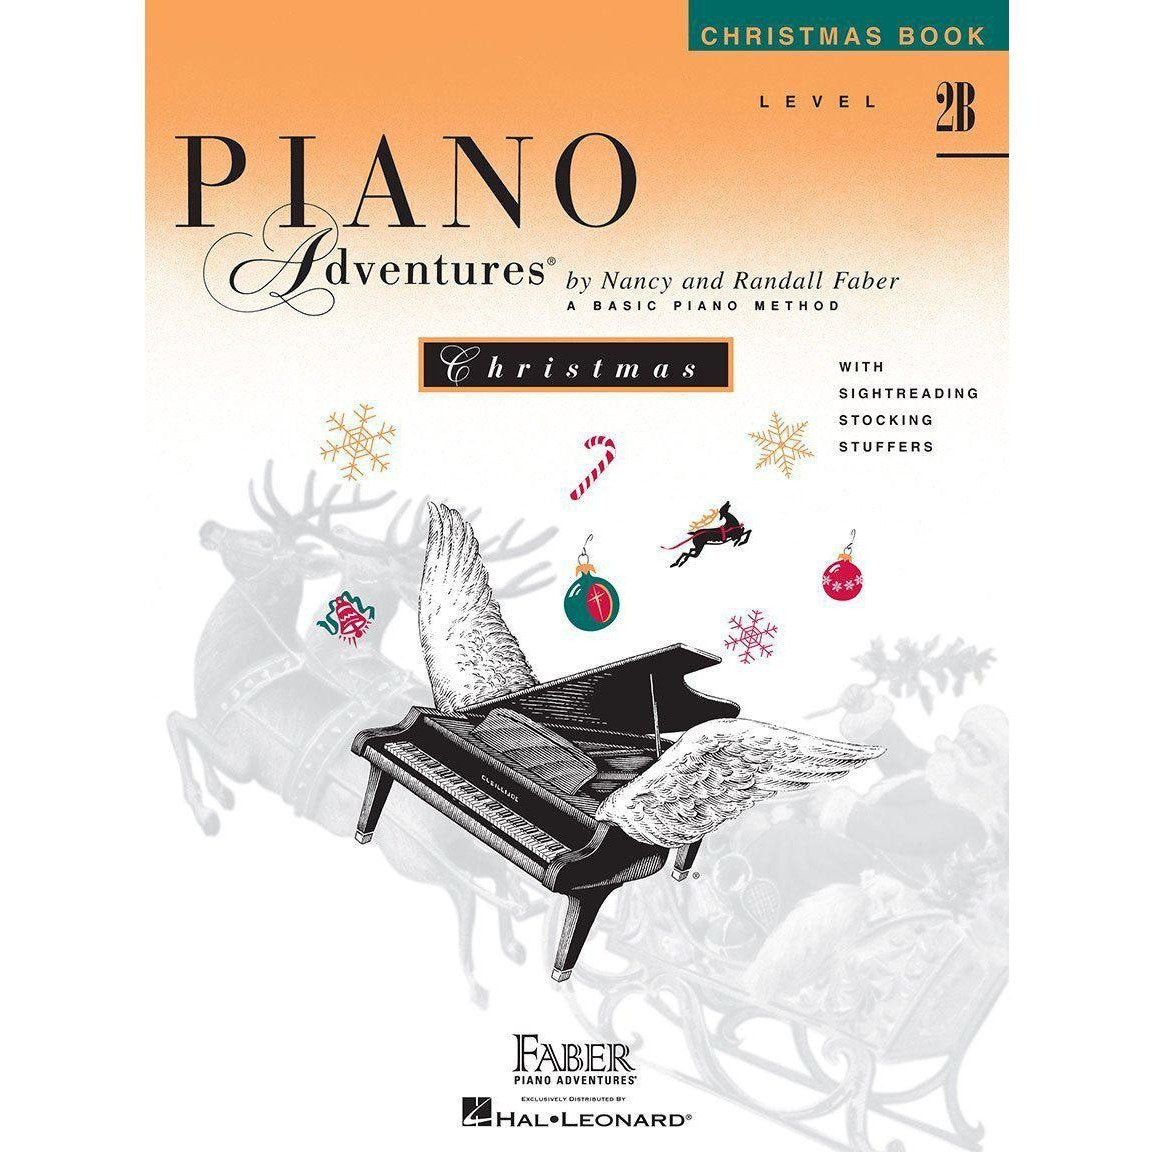 Faber Piano Adventures-2B-Christmas-Andy's Music